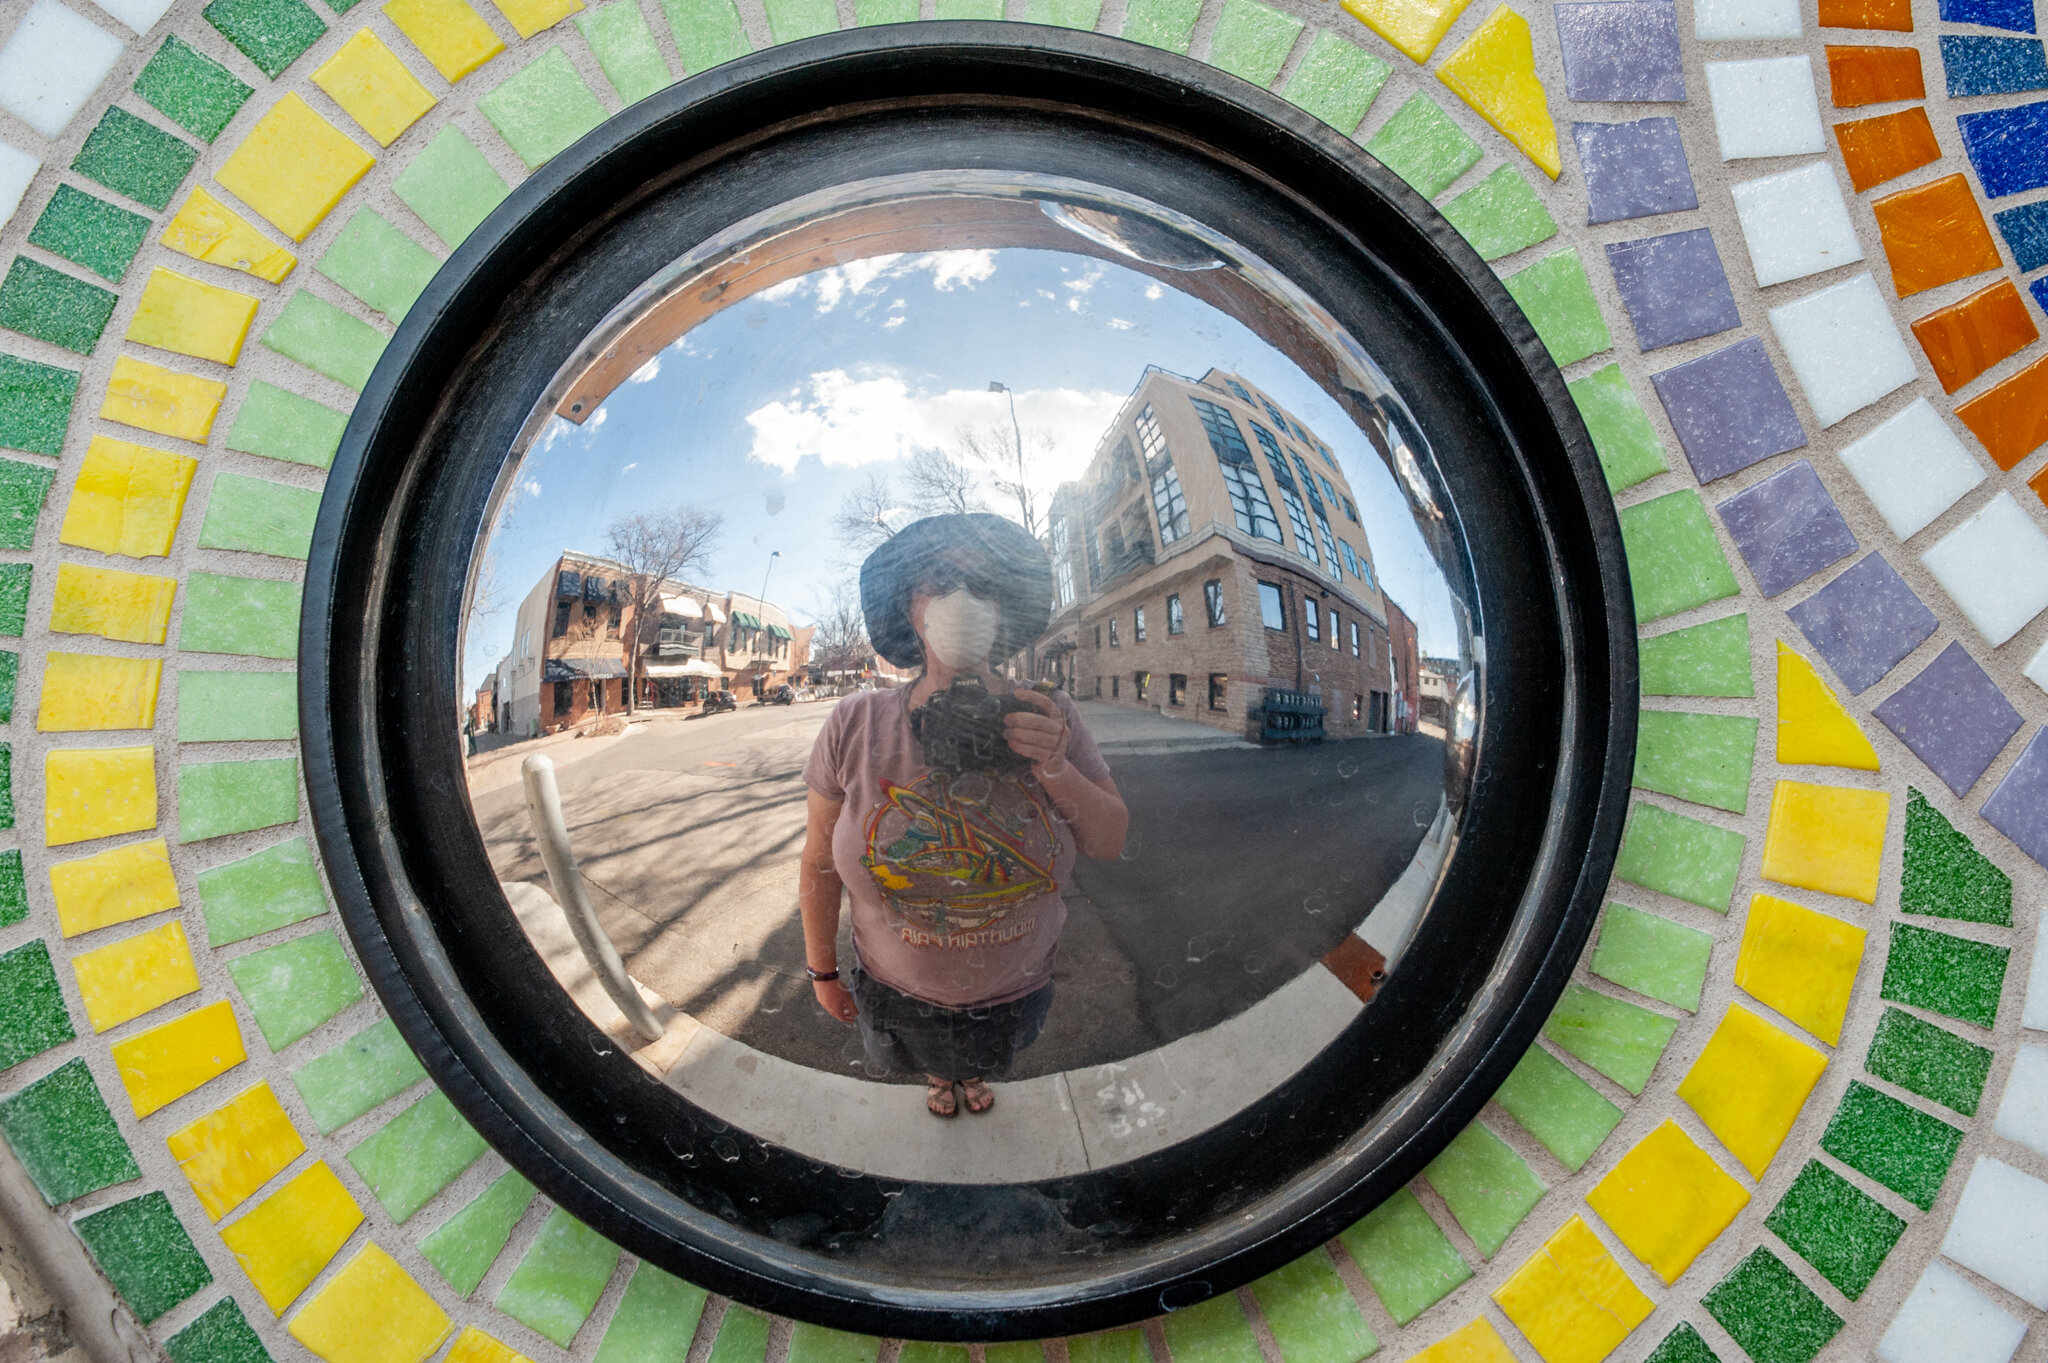  My city is so empty. Though I’ve passed by this public artwork many times, it took the quiet stillness to notice my reflection in part of it. The piece by Joe McGrane is called “Alley Views.”  The photo was taken in Old Town Fort Collins, on April 7